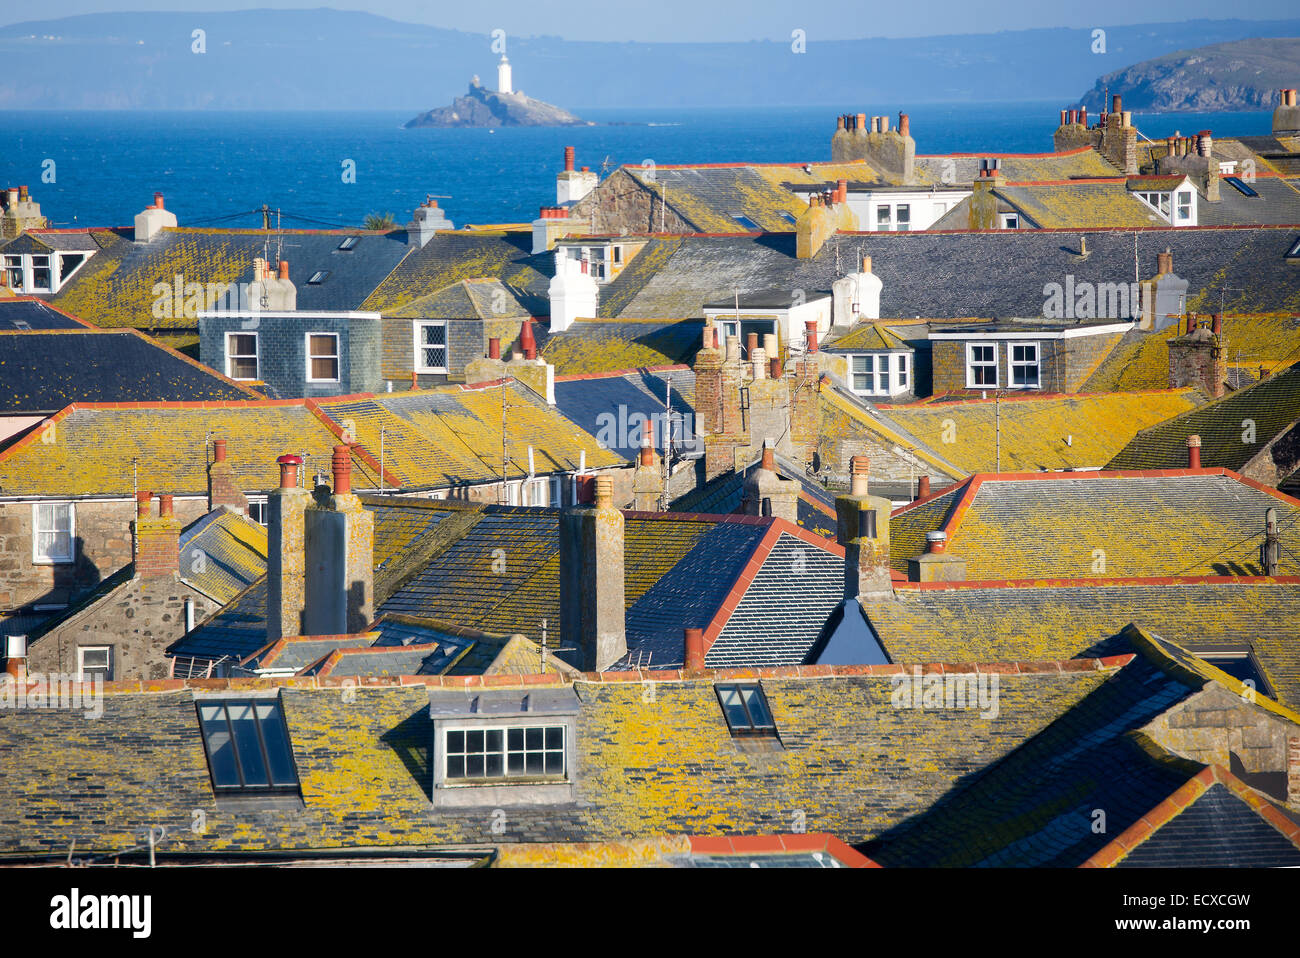 The lichen-covered roofs of St. Ives with Godrevy lighthouse beyond, Cornwall, England, UK. Stock Photo